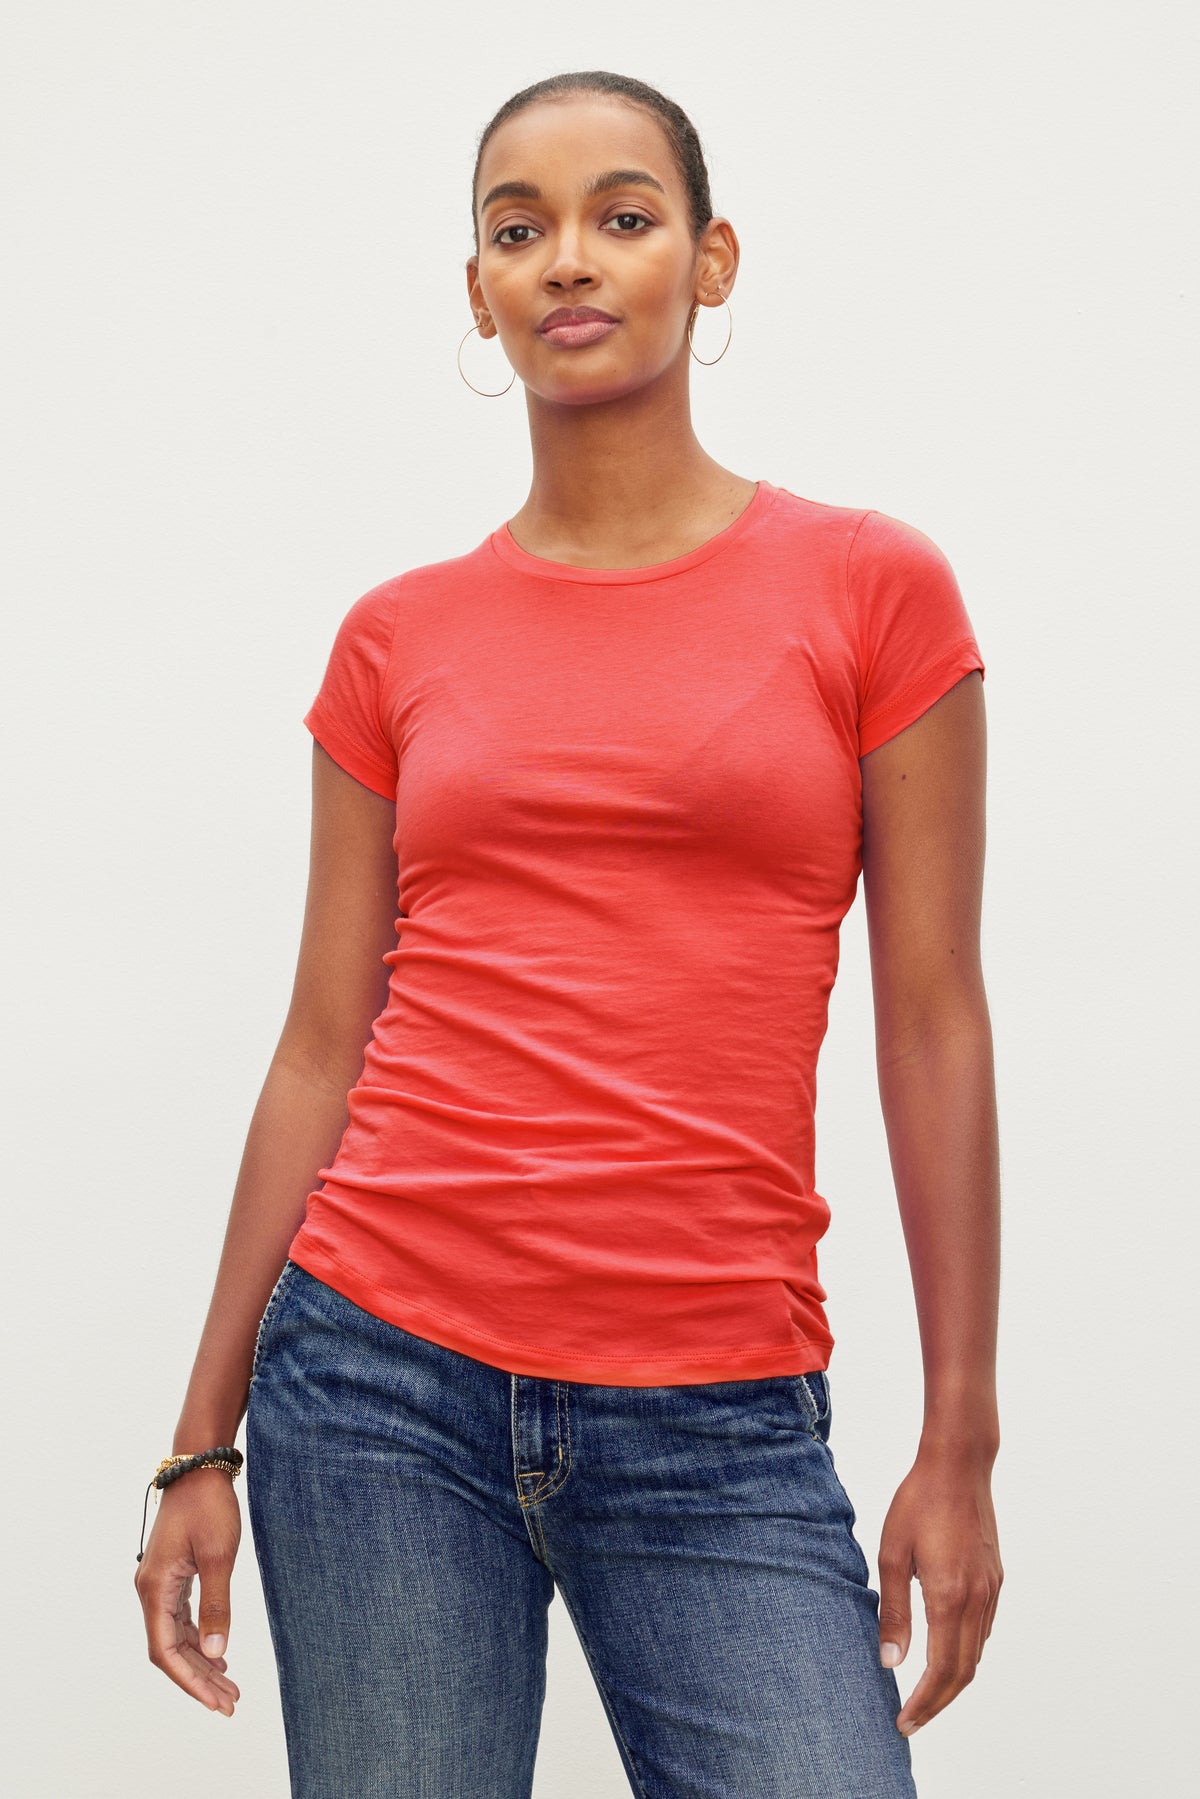 A woman in a JEMMA GAUZY WHISPER FITTED CREW NECK TEE by Velvet by Graham & Spencer and blue jeans standing against a white background.-36533000175809